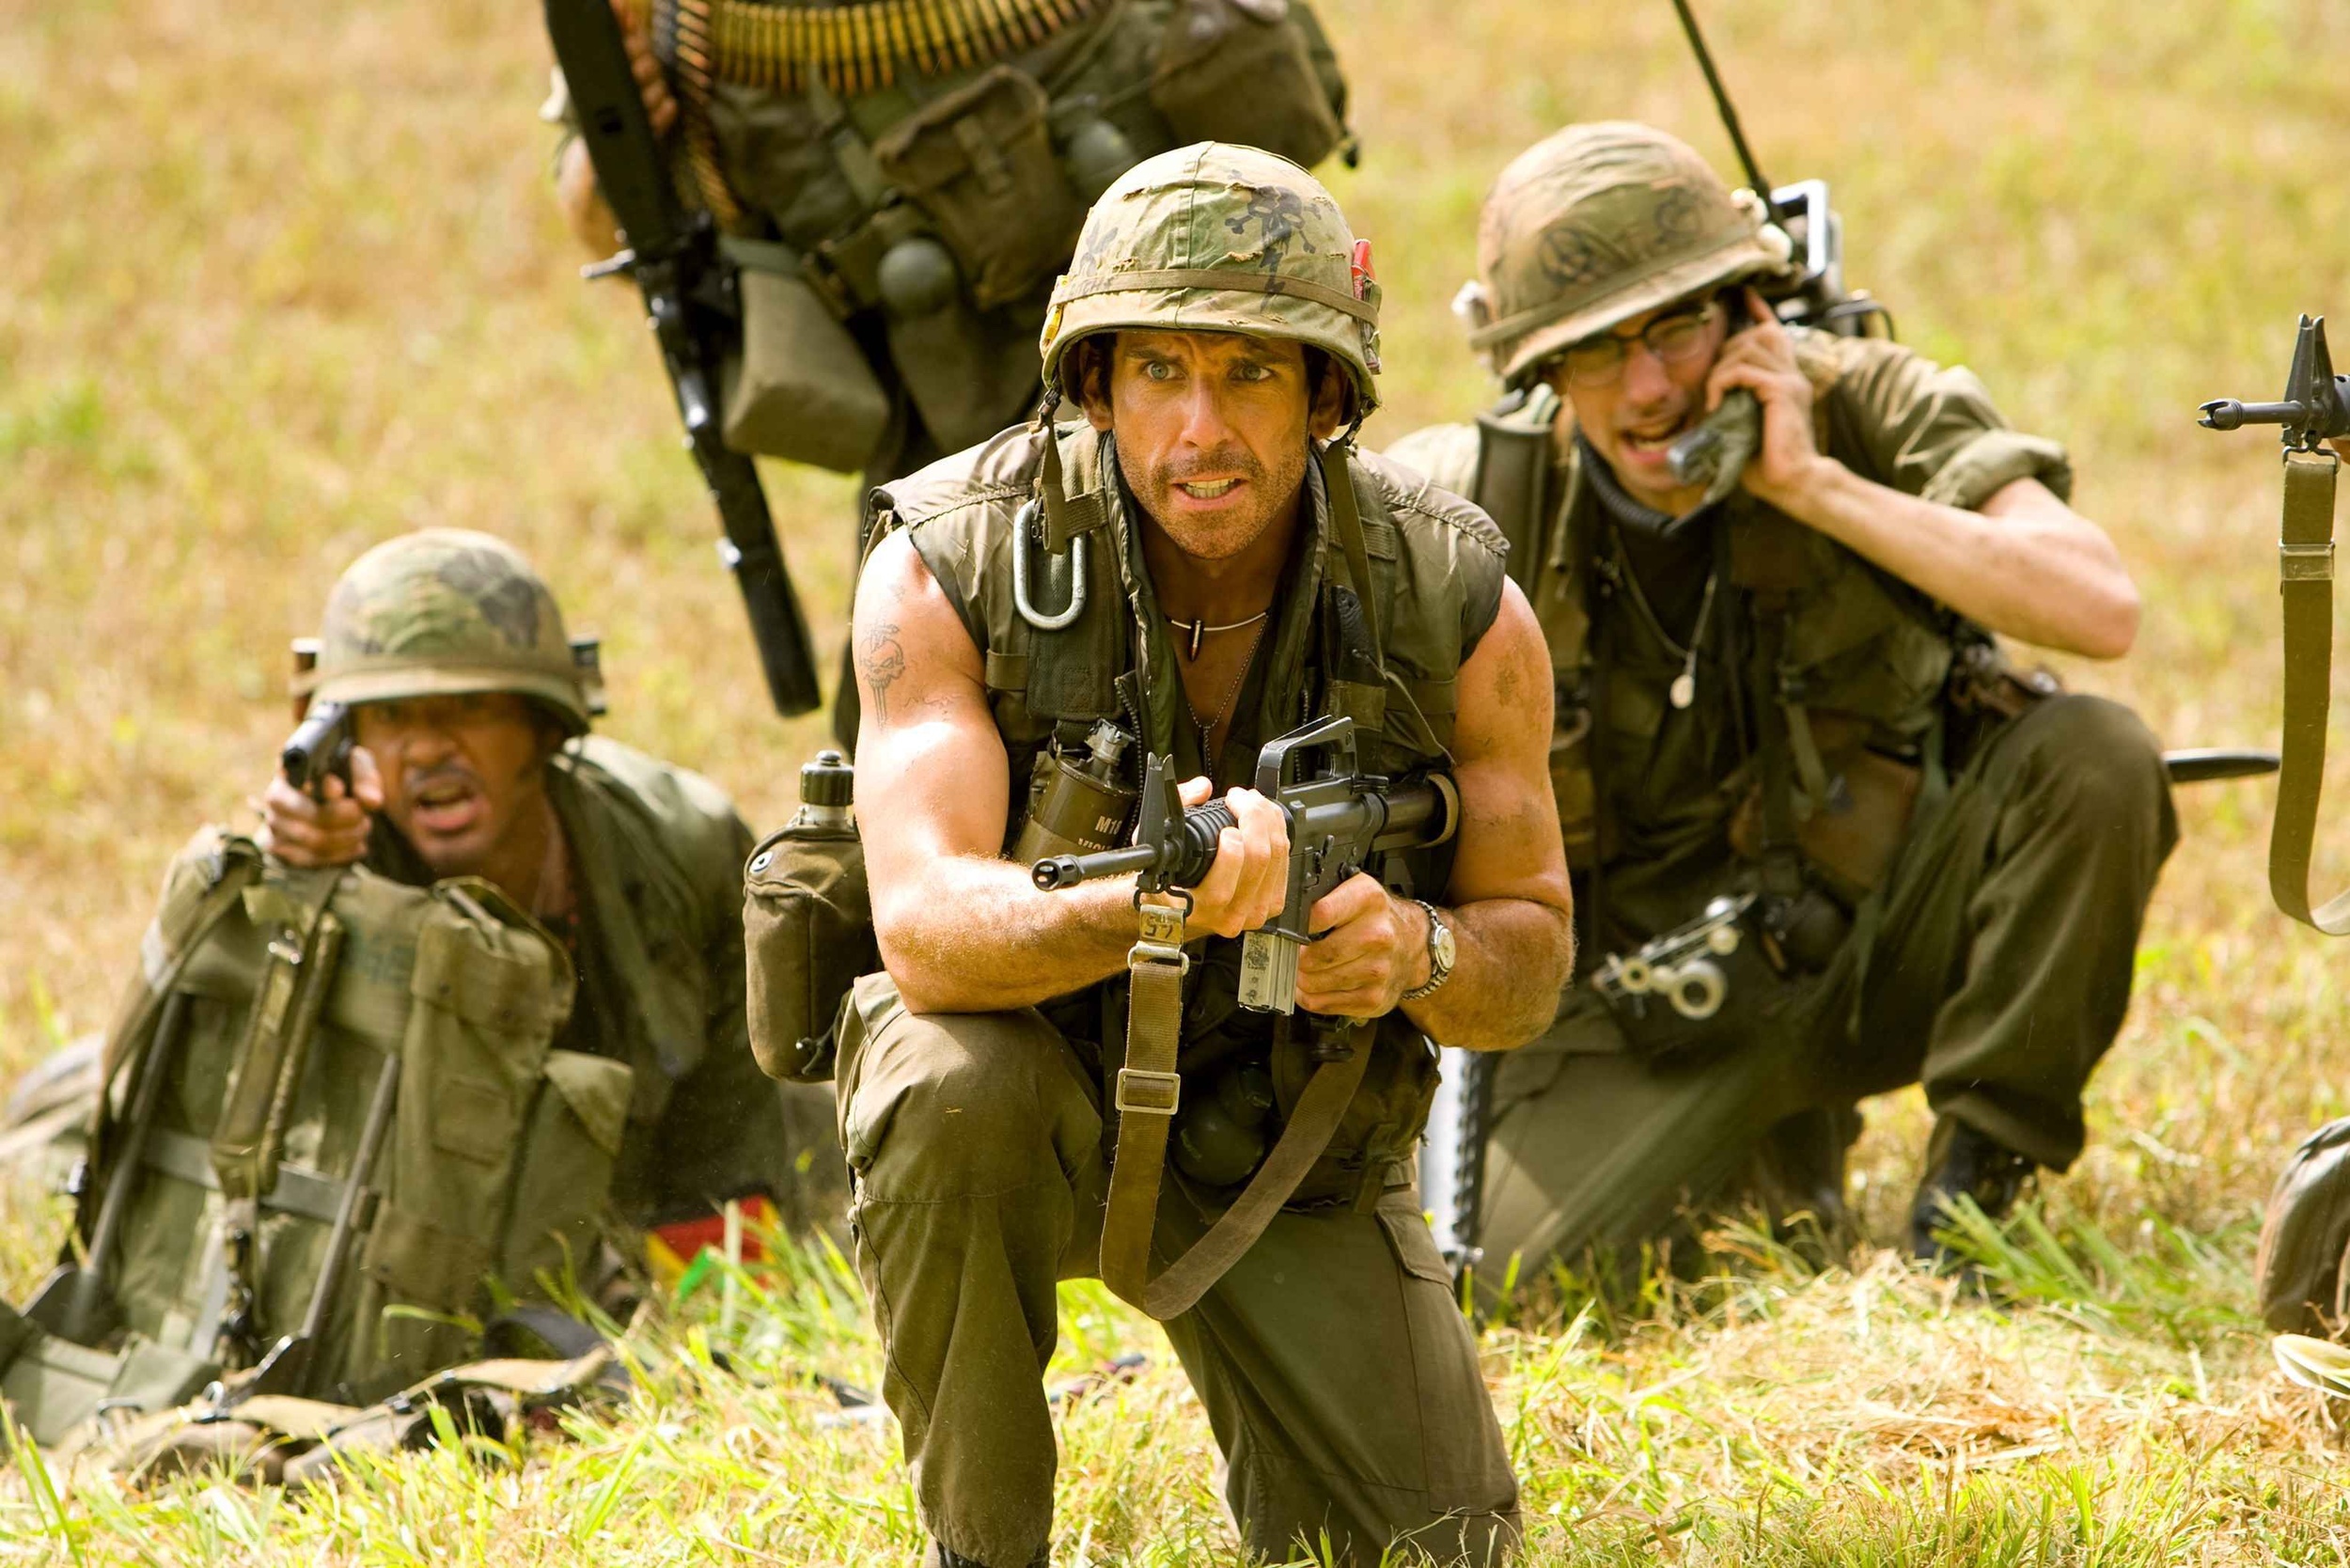 <p>War films can be tricky, and war comedies are even trickier. What about a comedy about making a war movie? <em>Tropic Thunder</em> made that a reality. The film spoofs method acting, frequently in uncomfortable ways, and much more. War is hell, but these 20 facts about <em>Tropic Thunder</em> will hopefully be much more pleasant for you.</p>